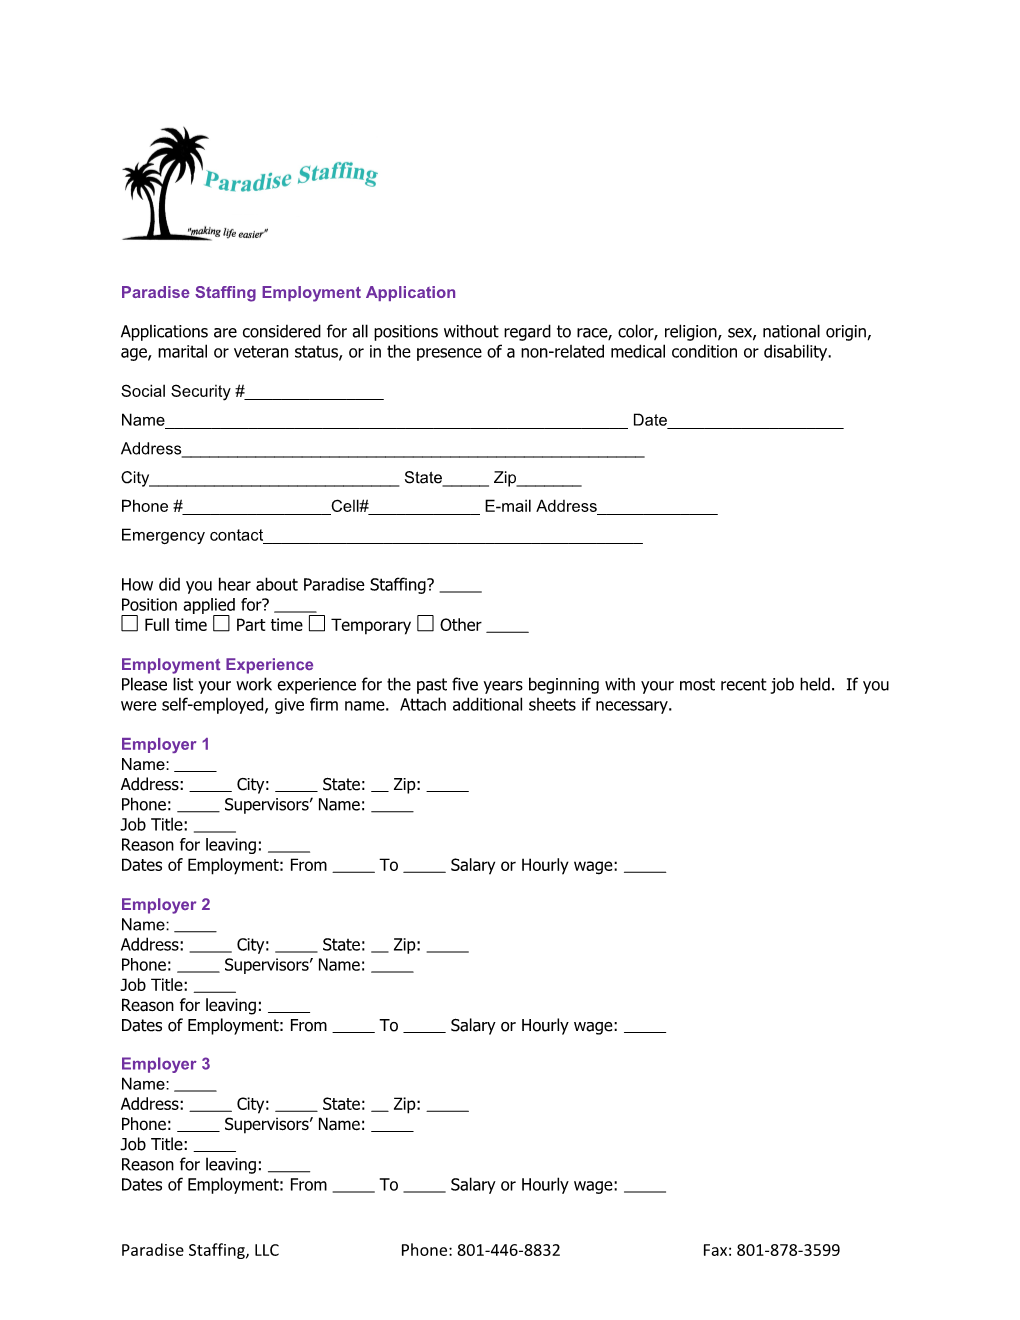 Paradise Staffing Employment Application